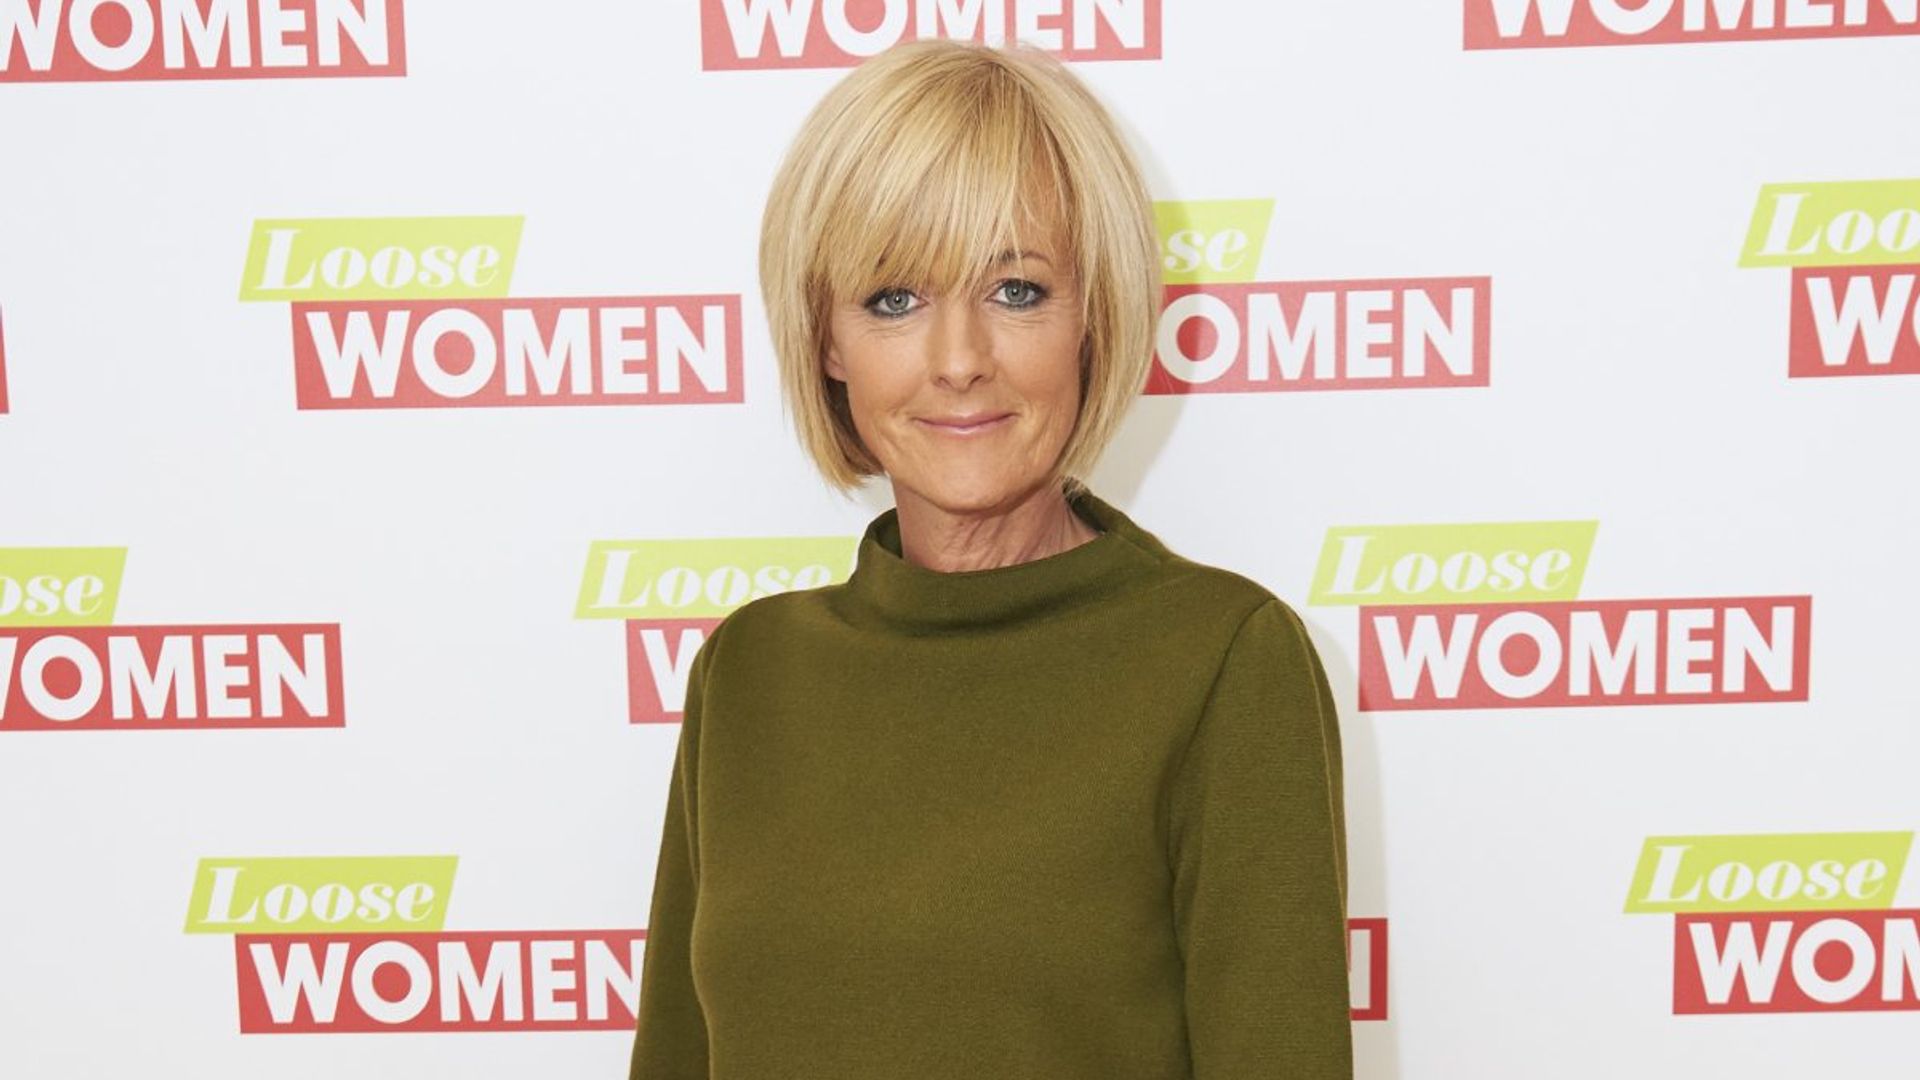 Loose Women's Jane Moore and BBC's Naga Munchetty wear the same Me + Em dress on Friday shows